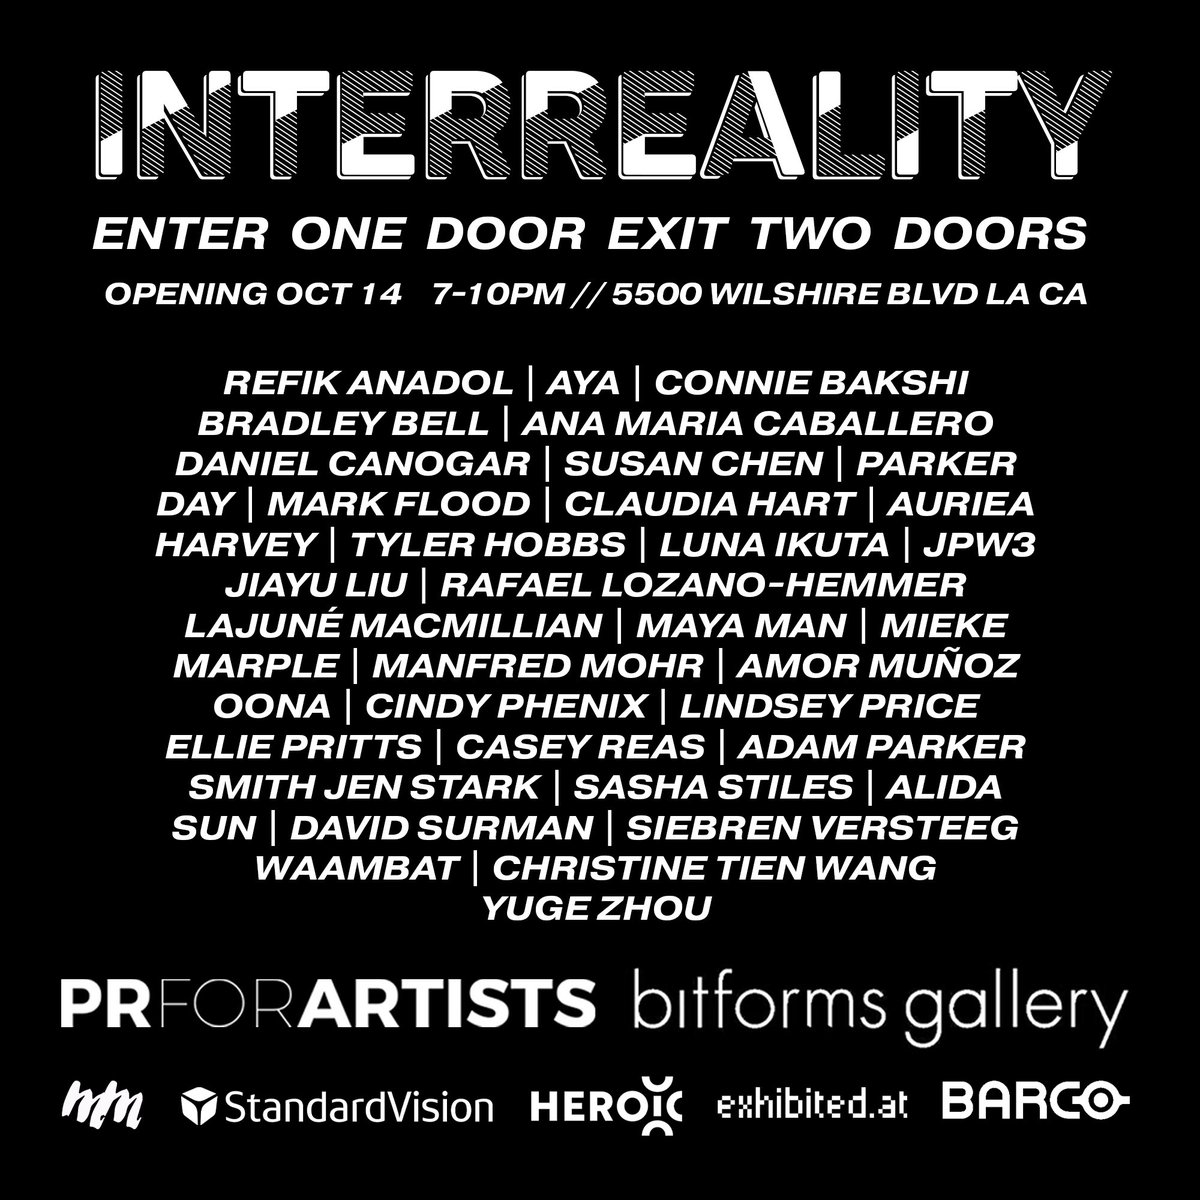 Presenting a new installation here October 14th in Los Angeles!